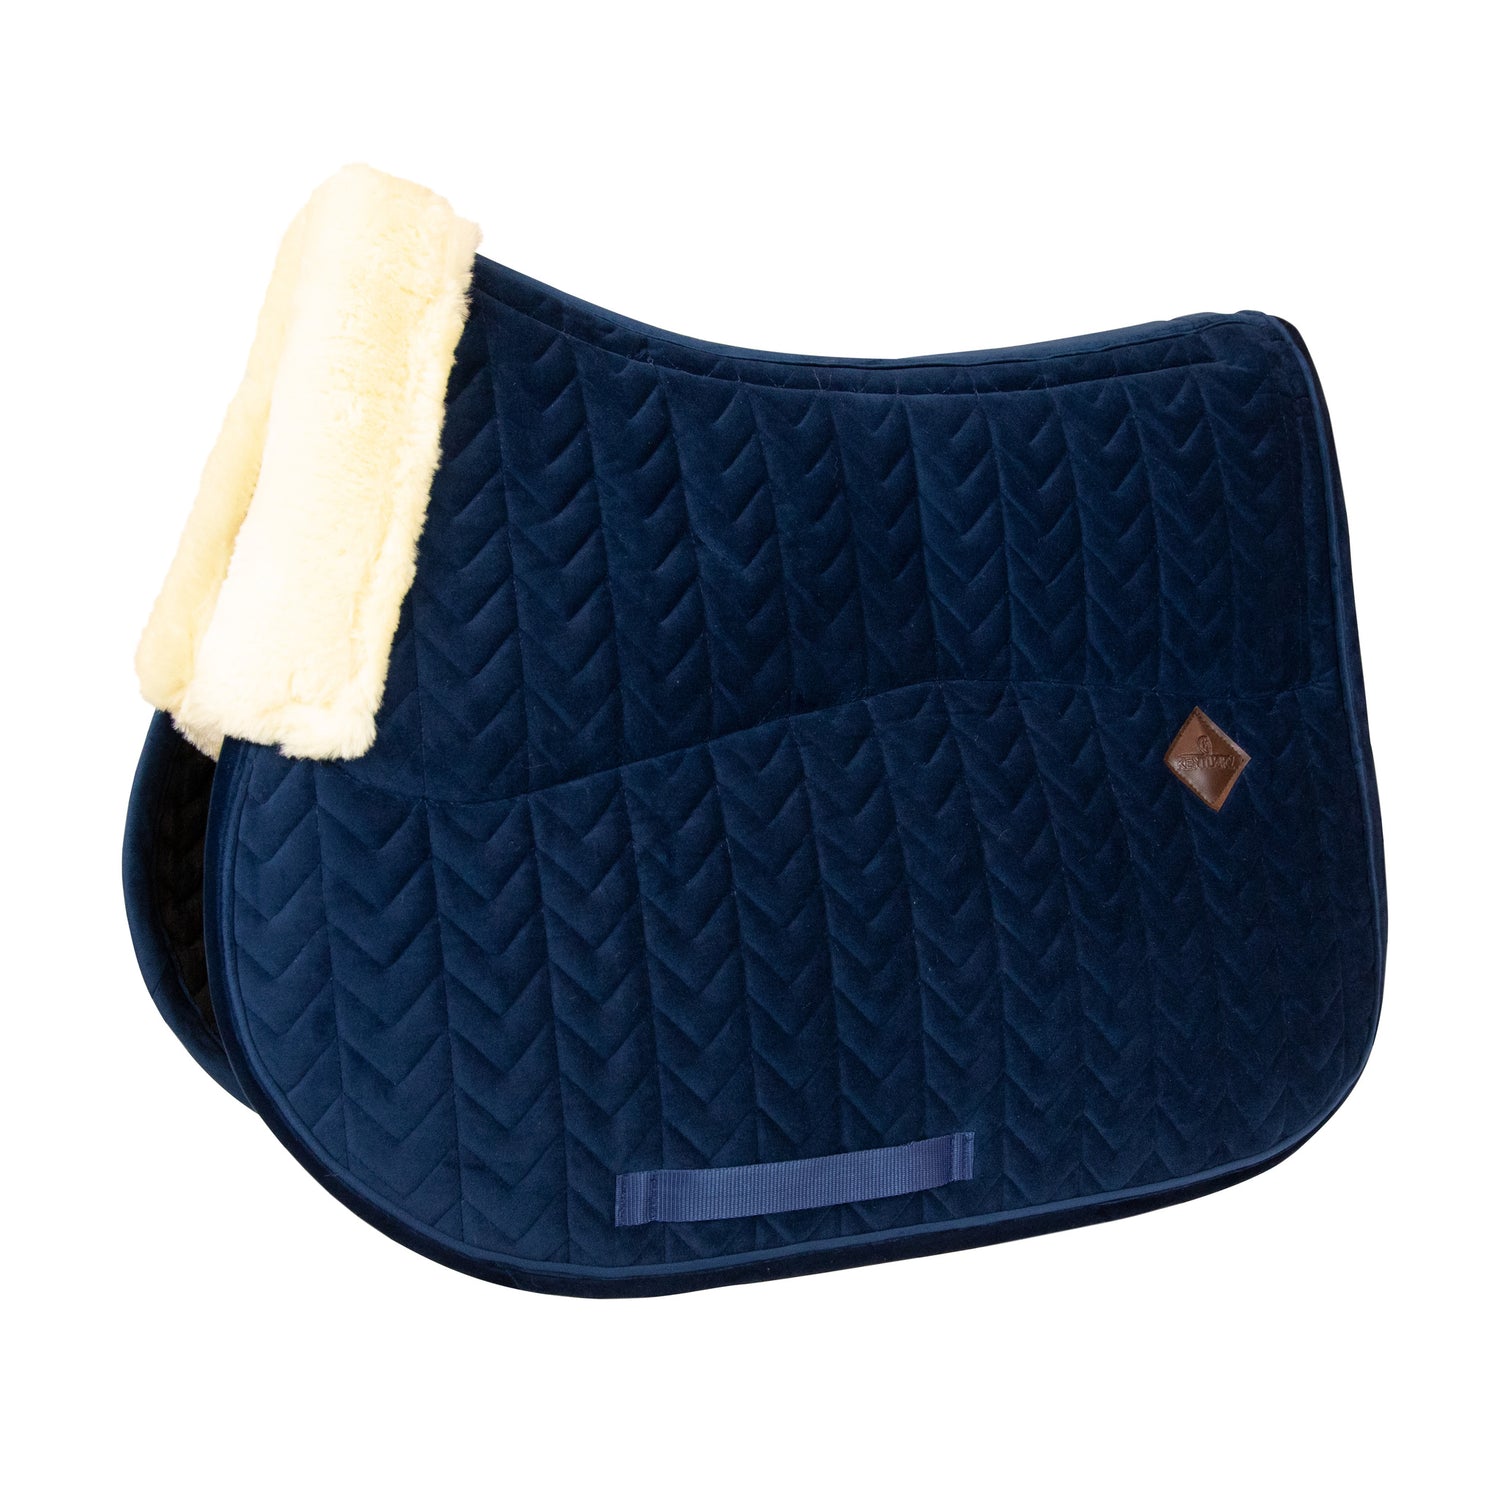 Best saddle pad for show jumping